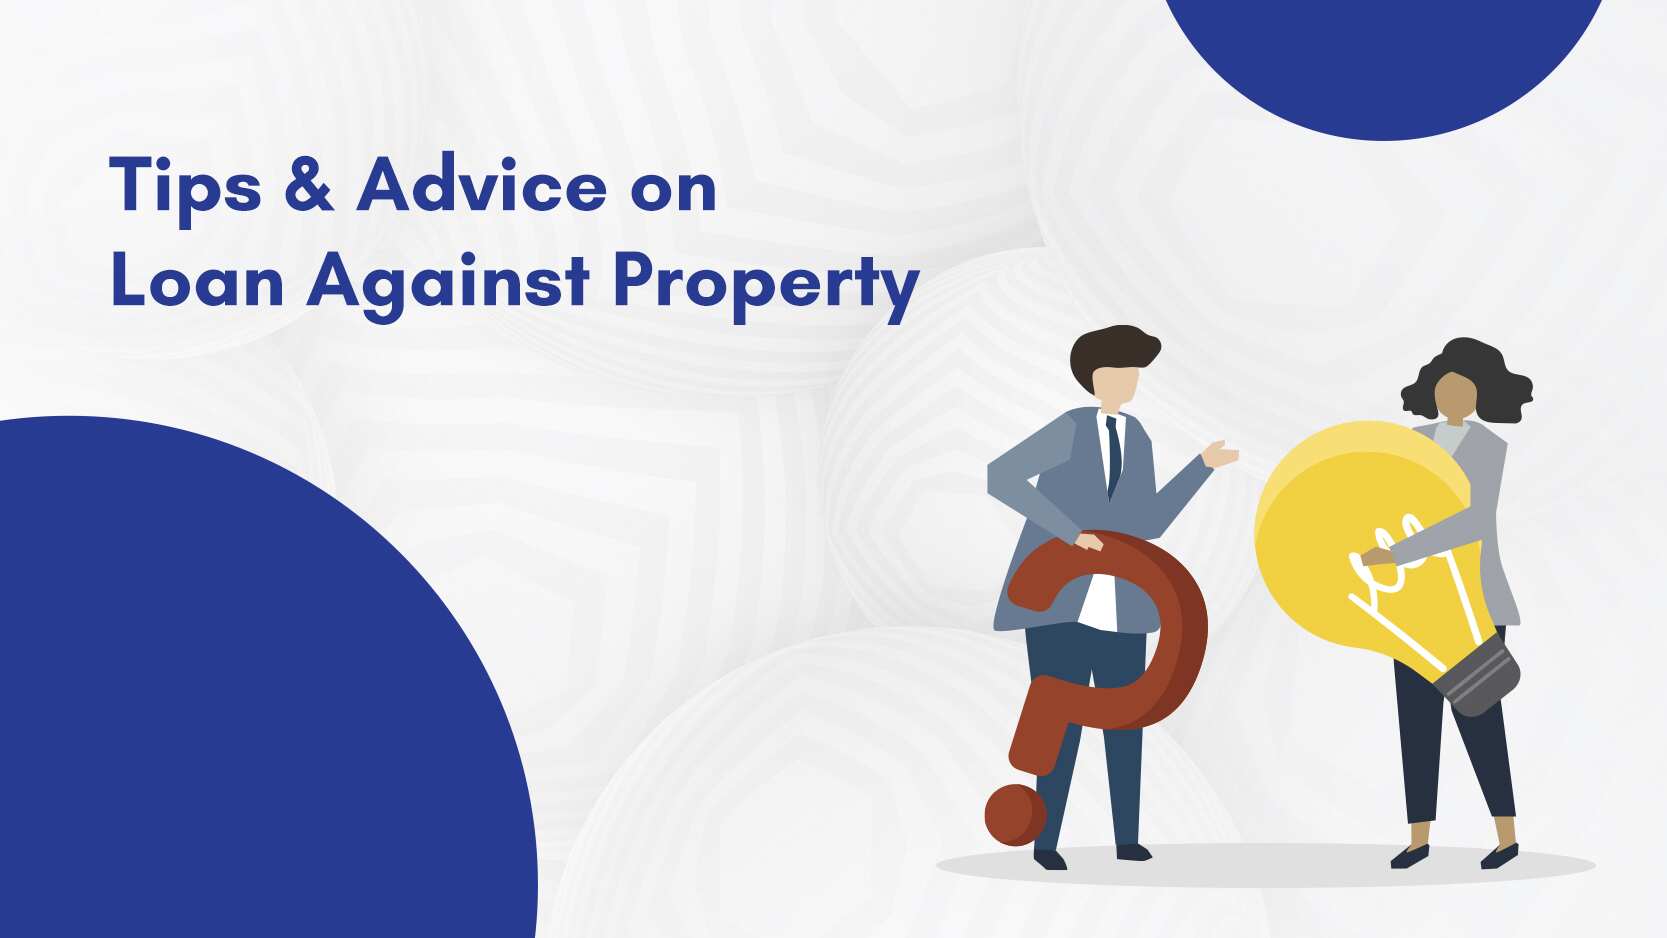 Unlock the Potential of Your Property: Tips & Advice on Loan Against Property